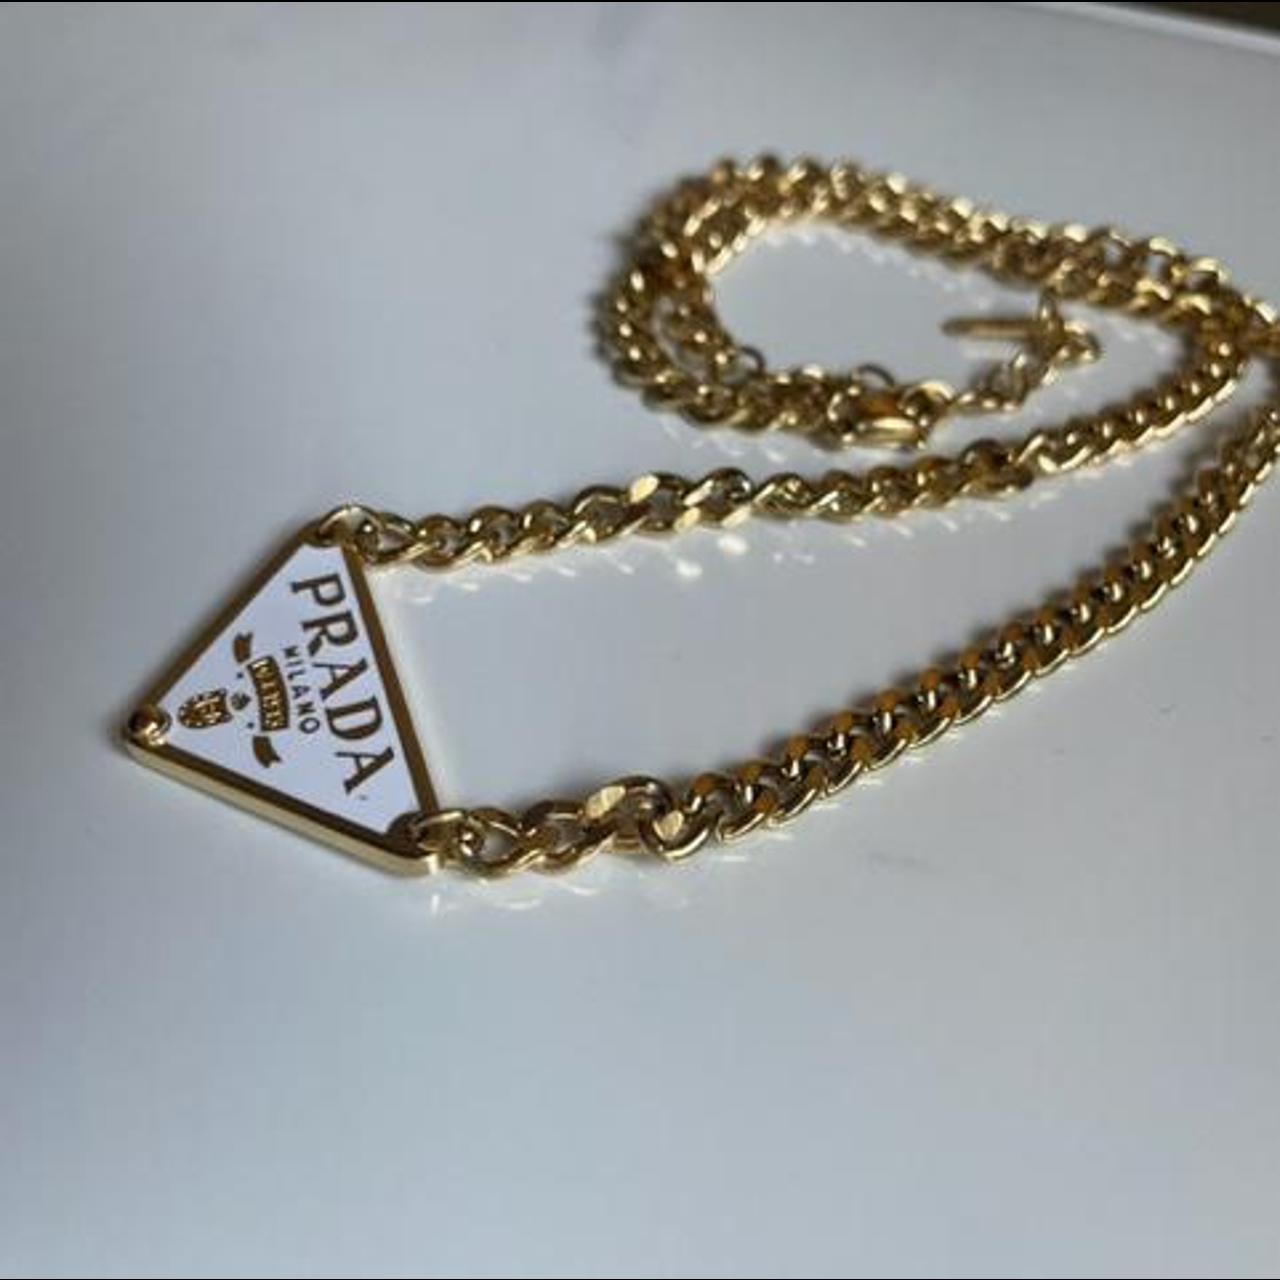 Gold Prada Necklace — STYLED BY NAT